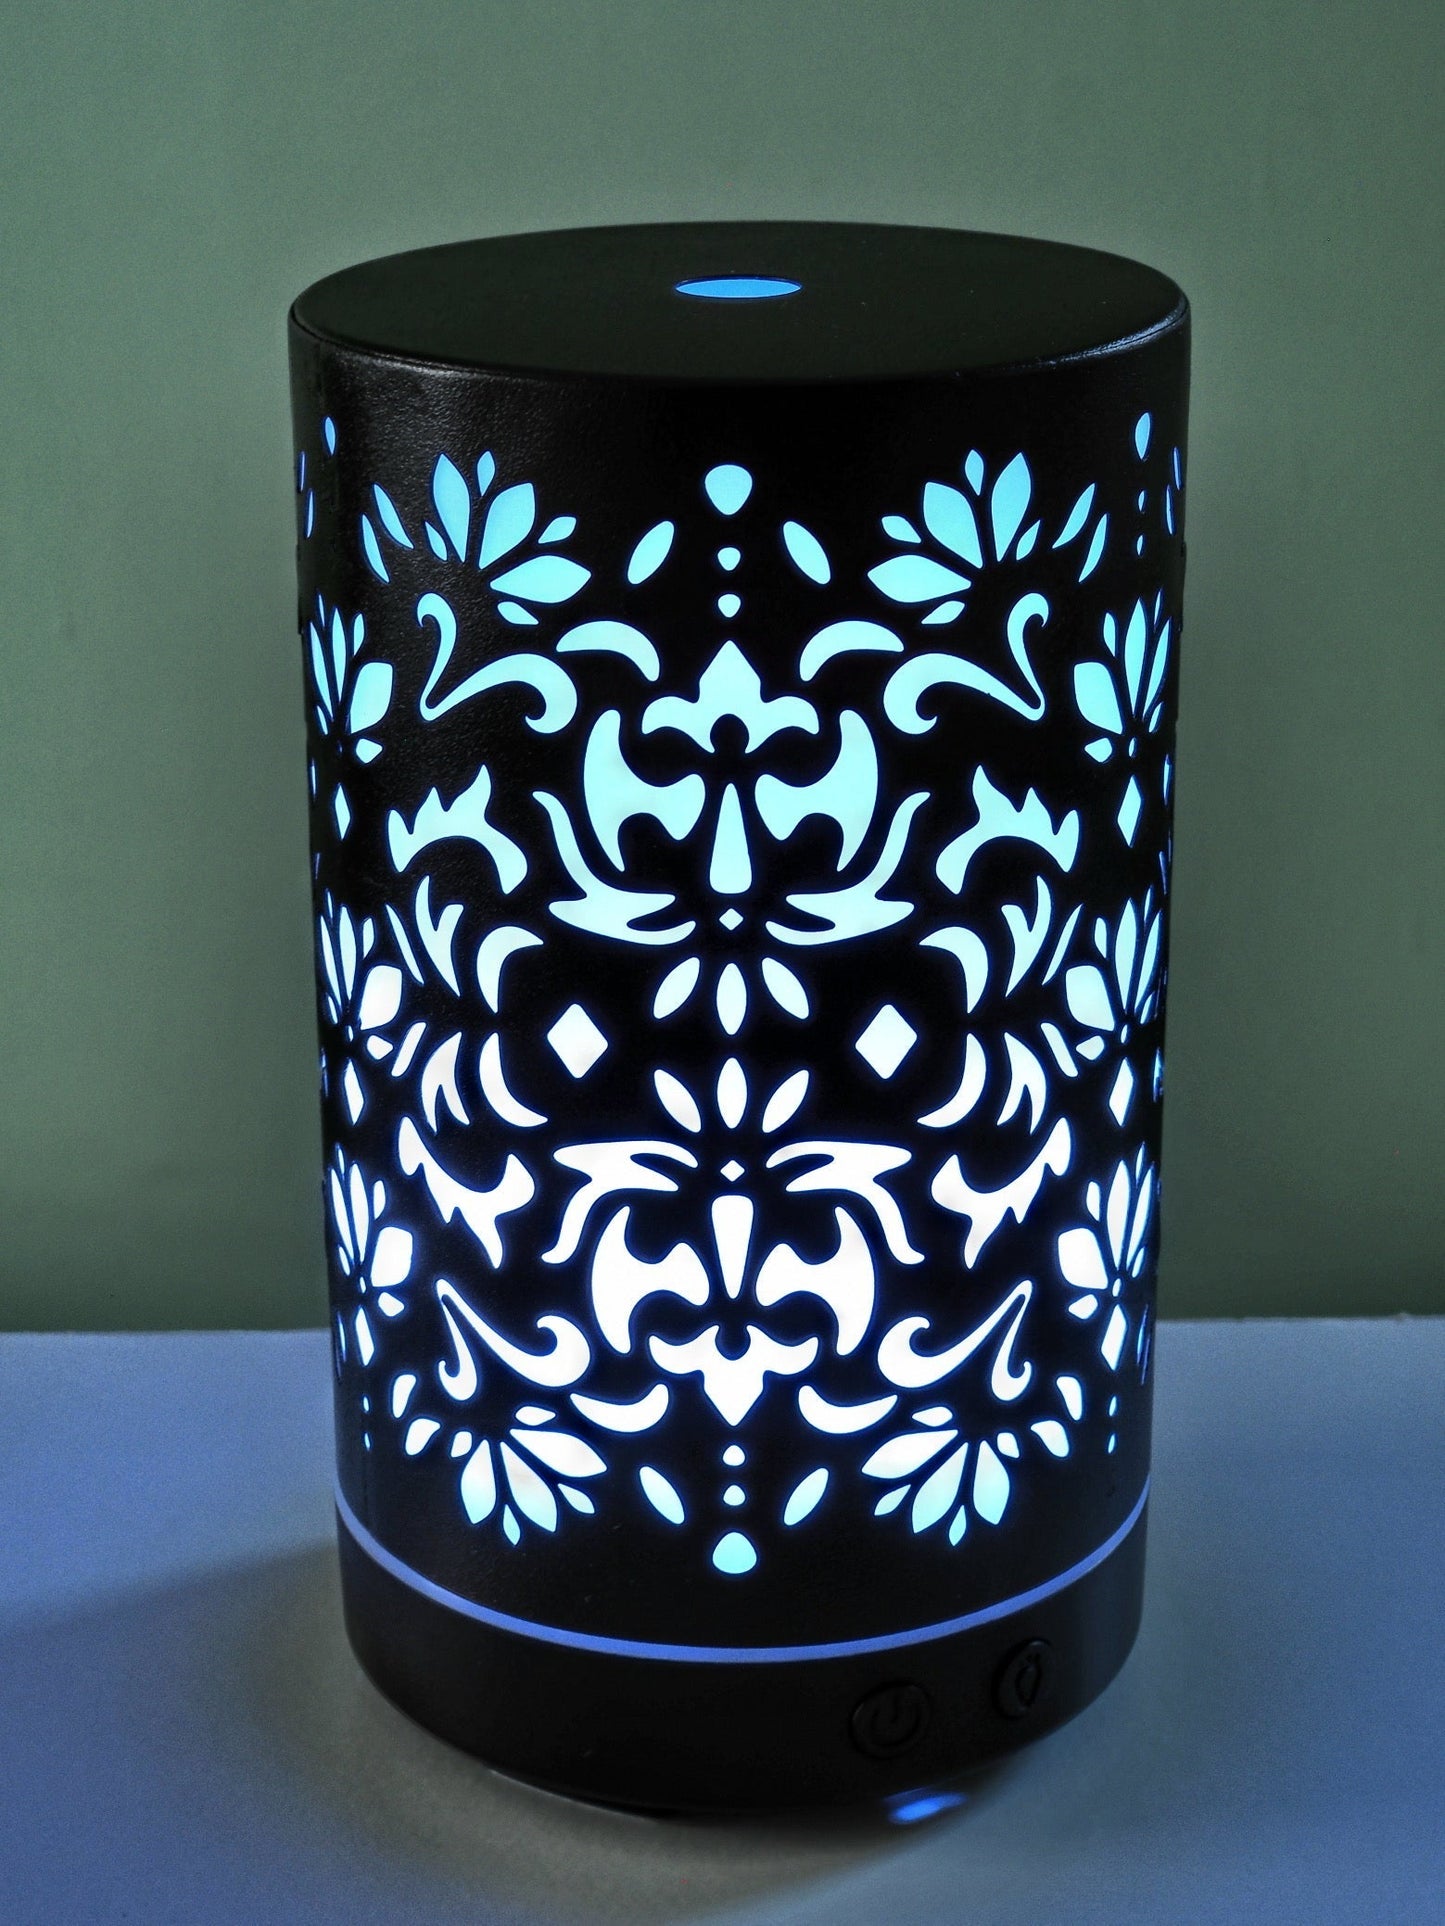 Elegant White Lotus Flower Aromatherapy Diffuser by Ancient Infusions.